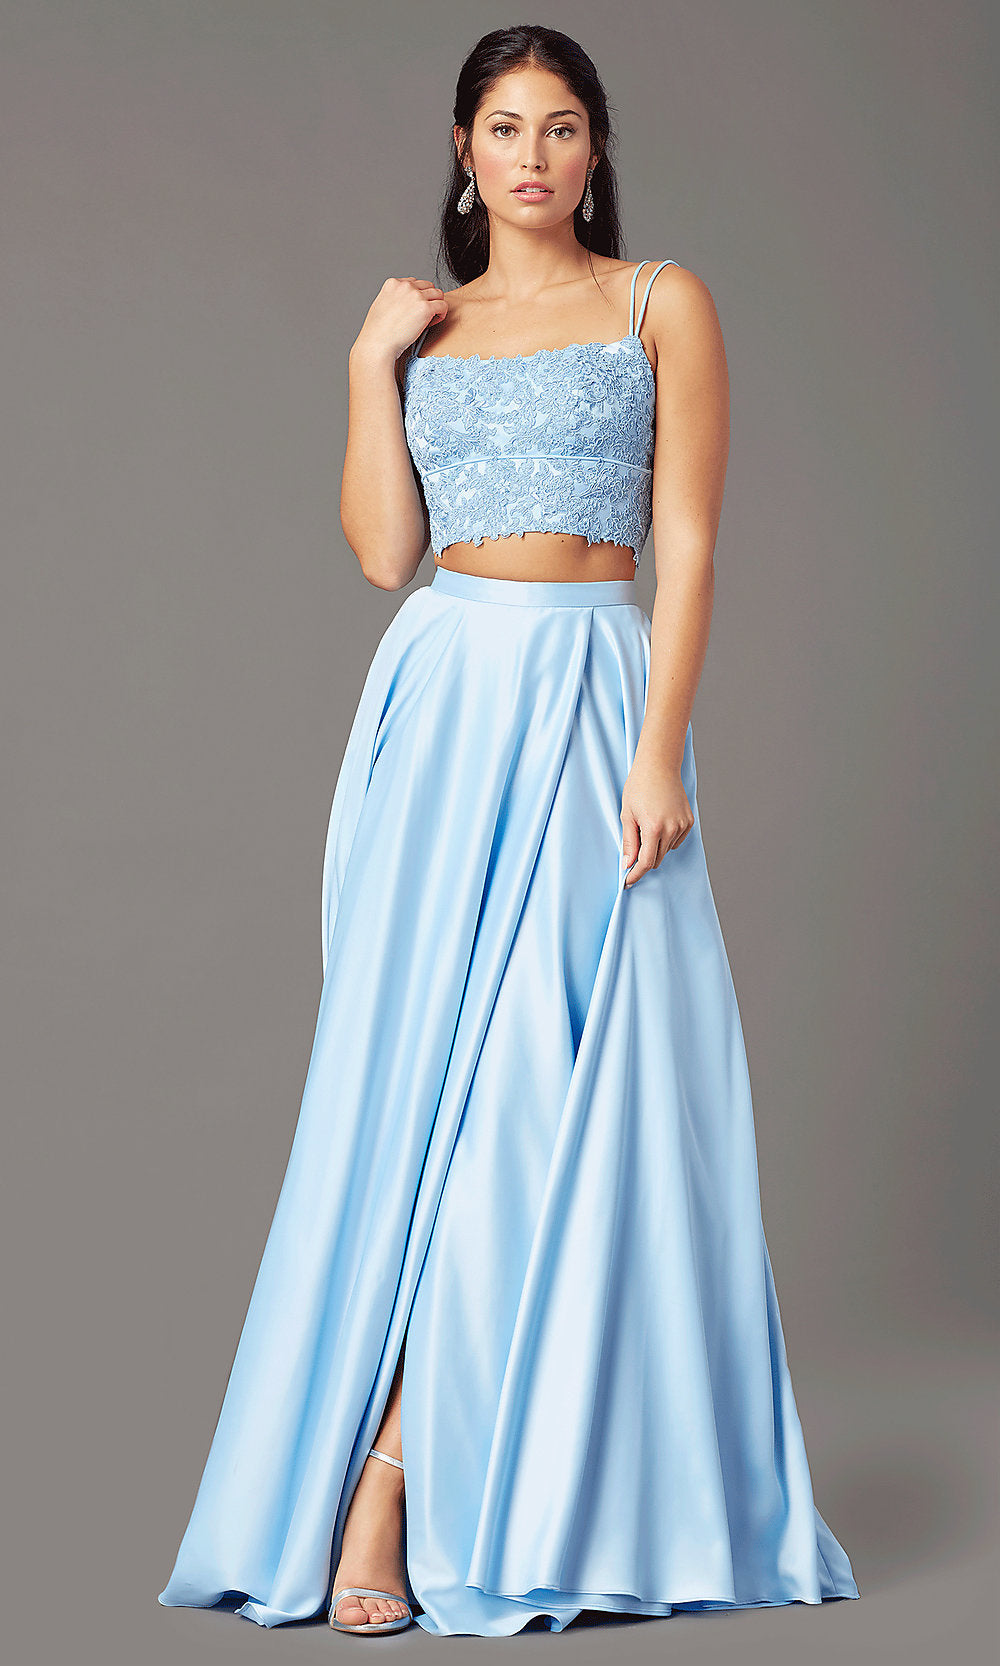  Satin Long Two-Piece Formal Prom Dress by PromGirl